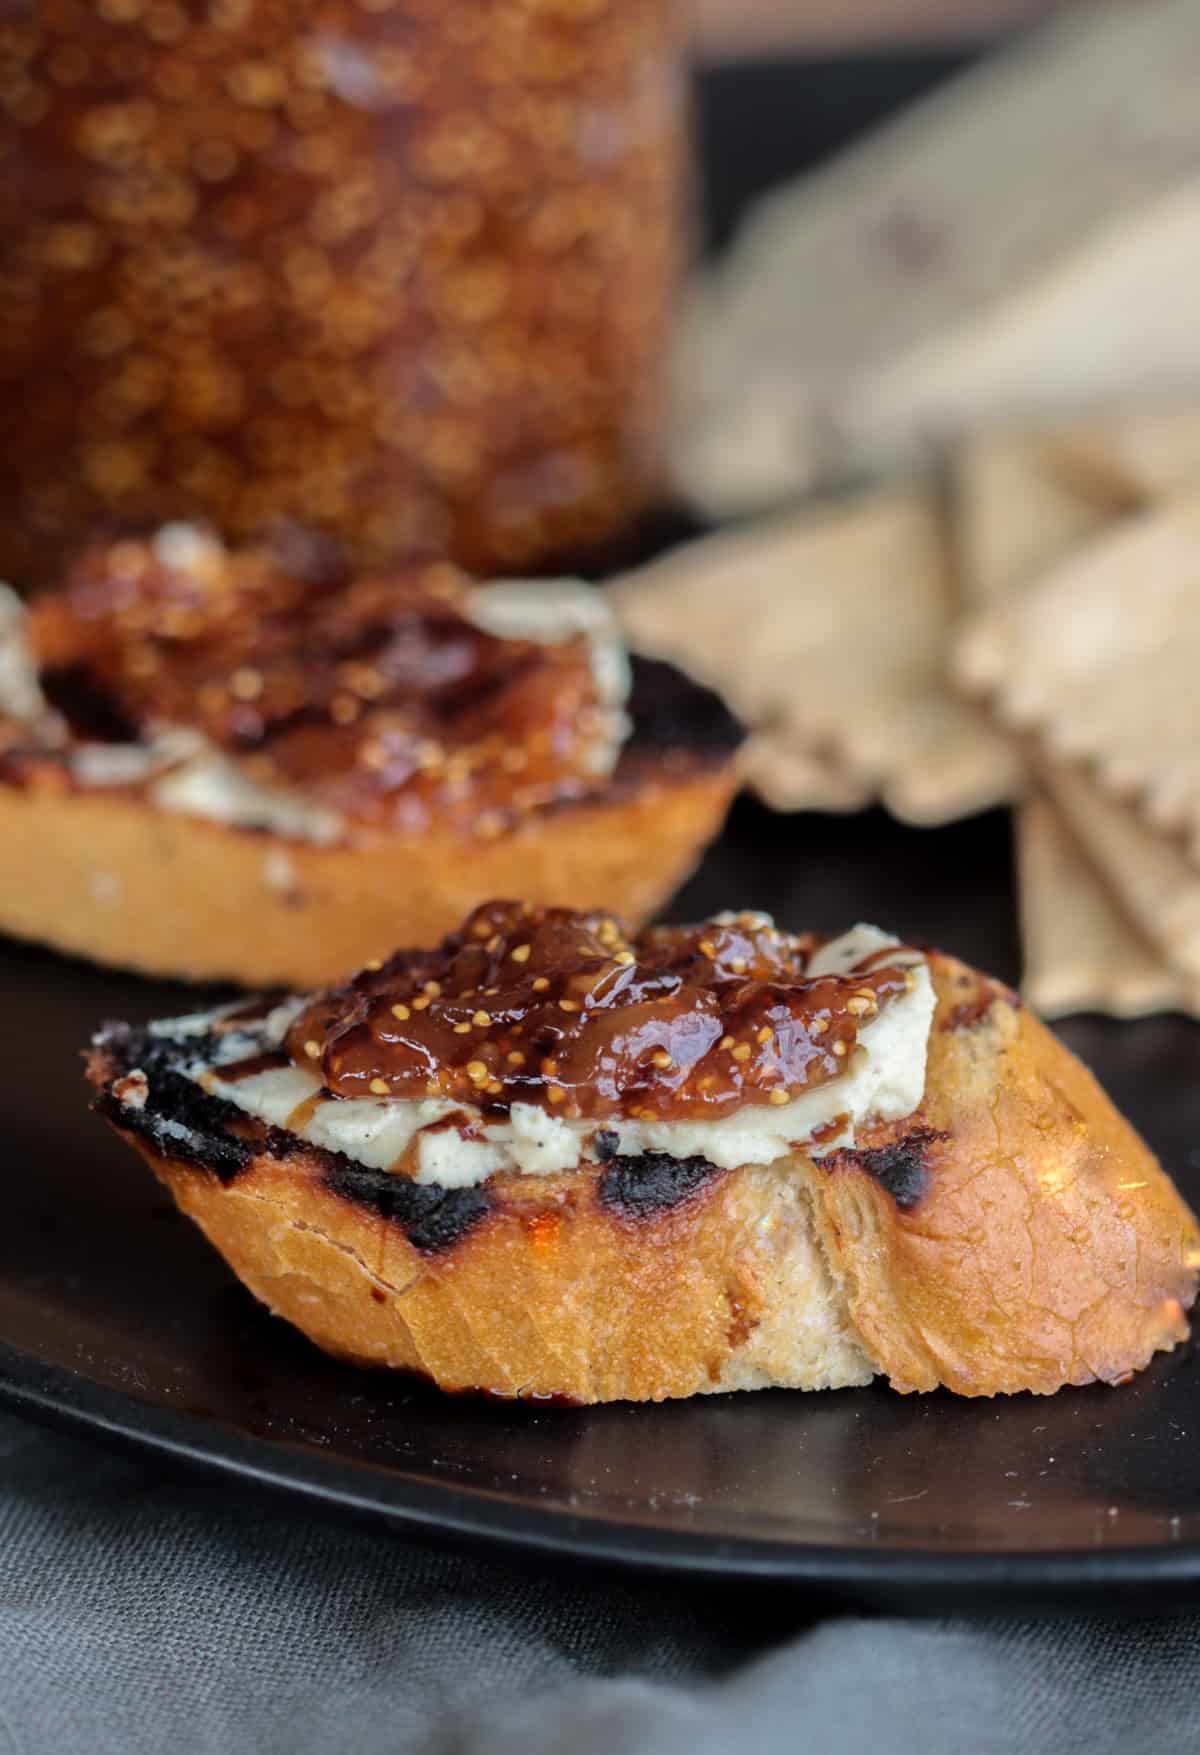 Dried fig jam spread on crostini with cheese and a balamic glaze.